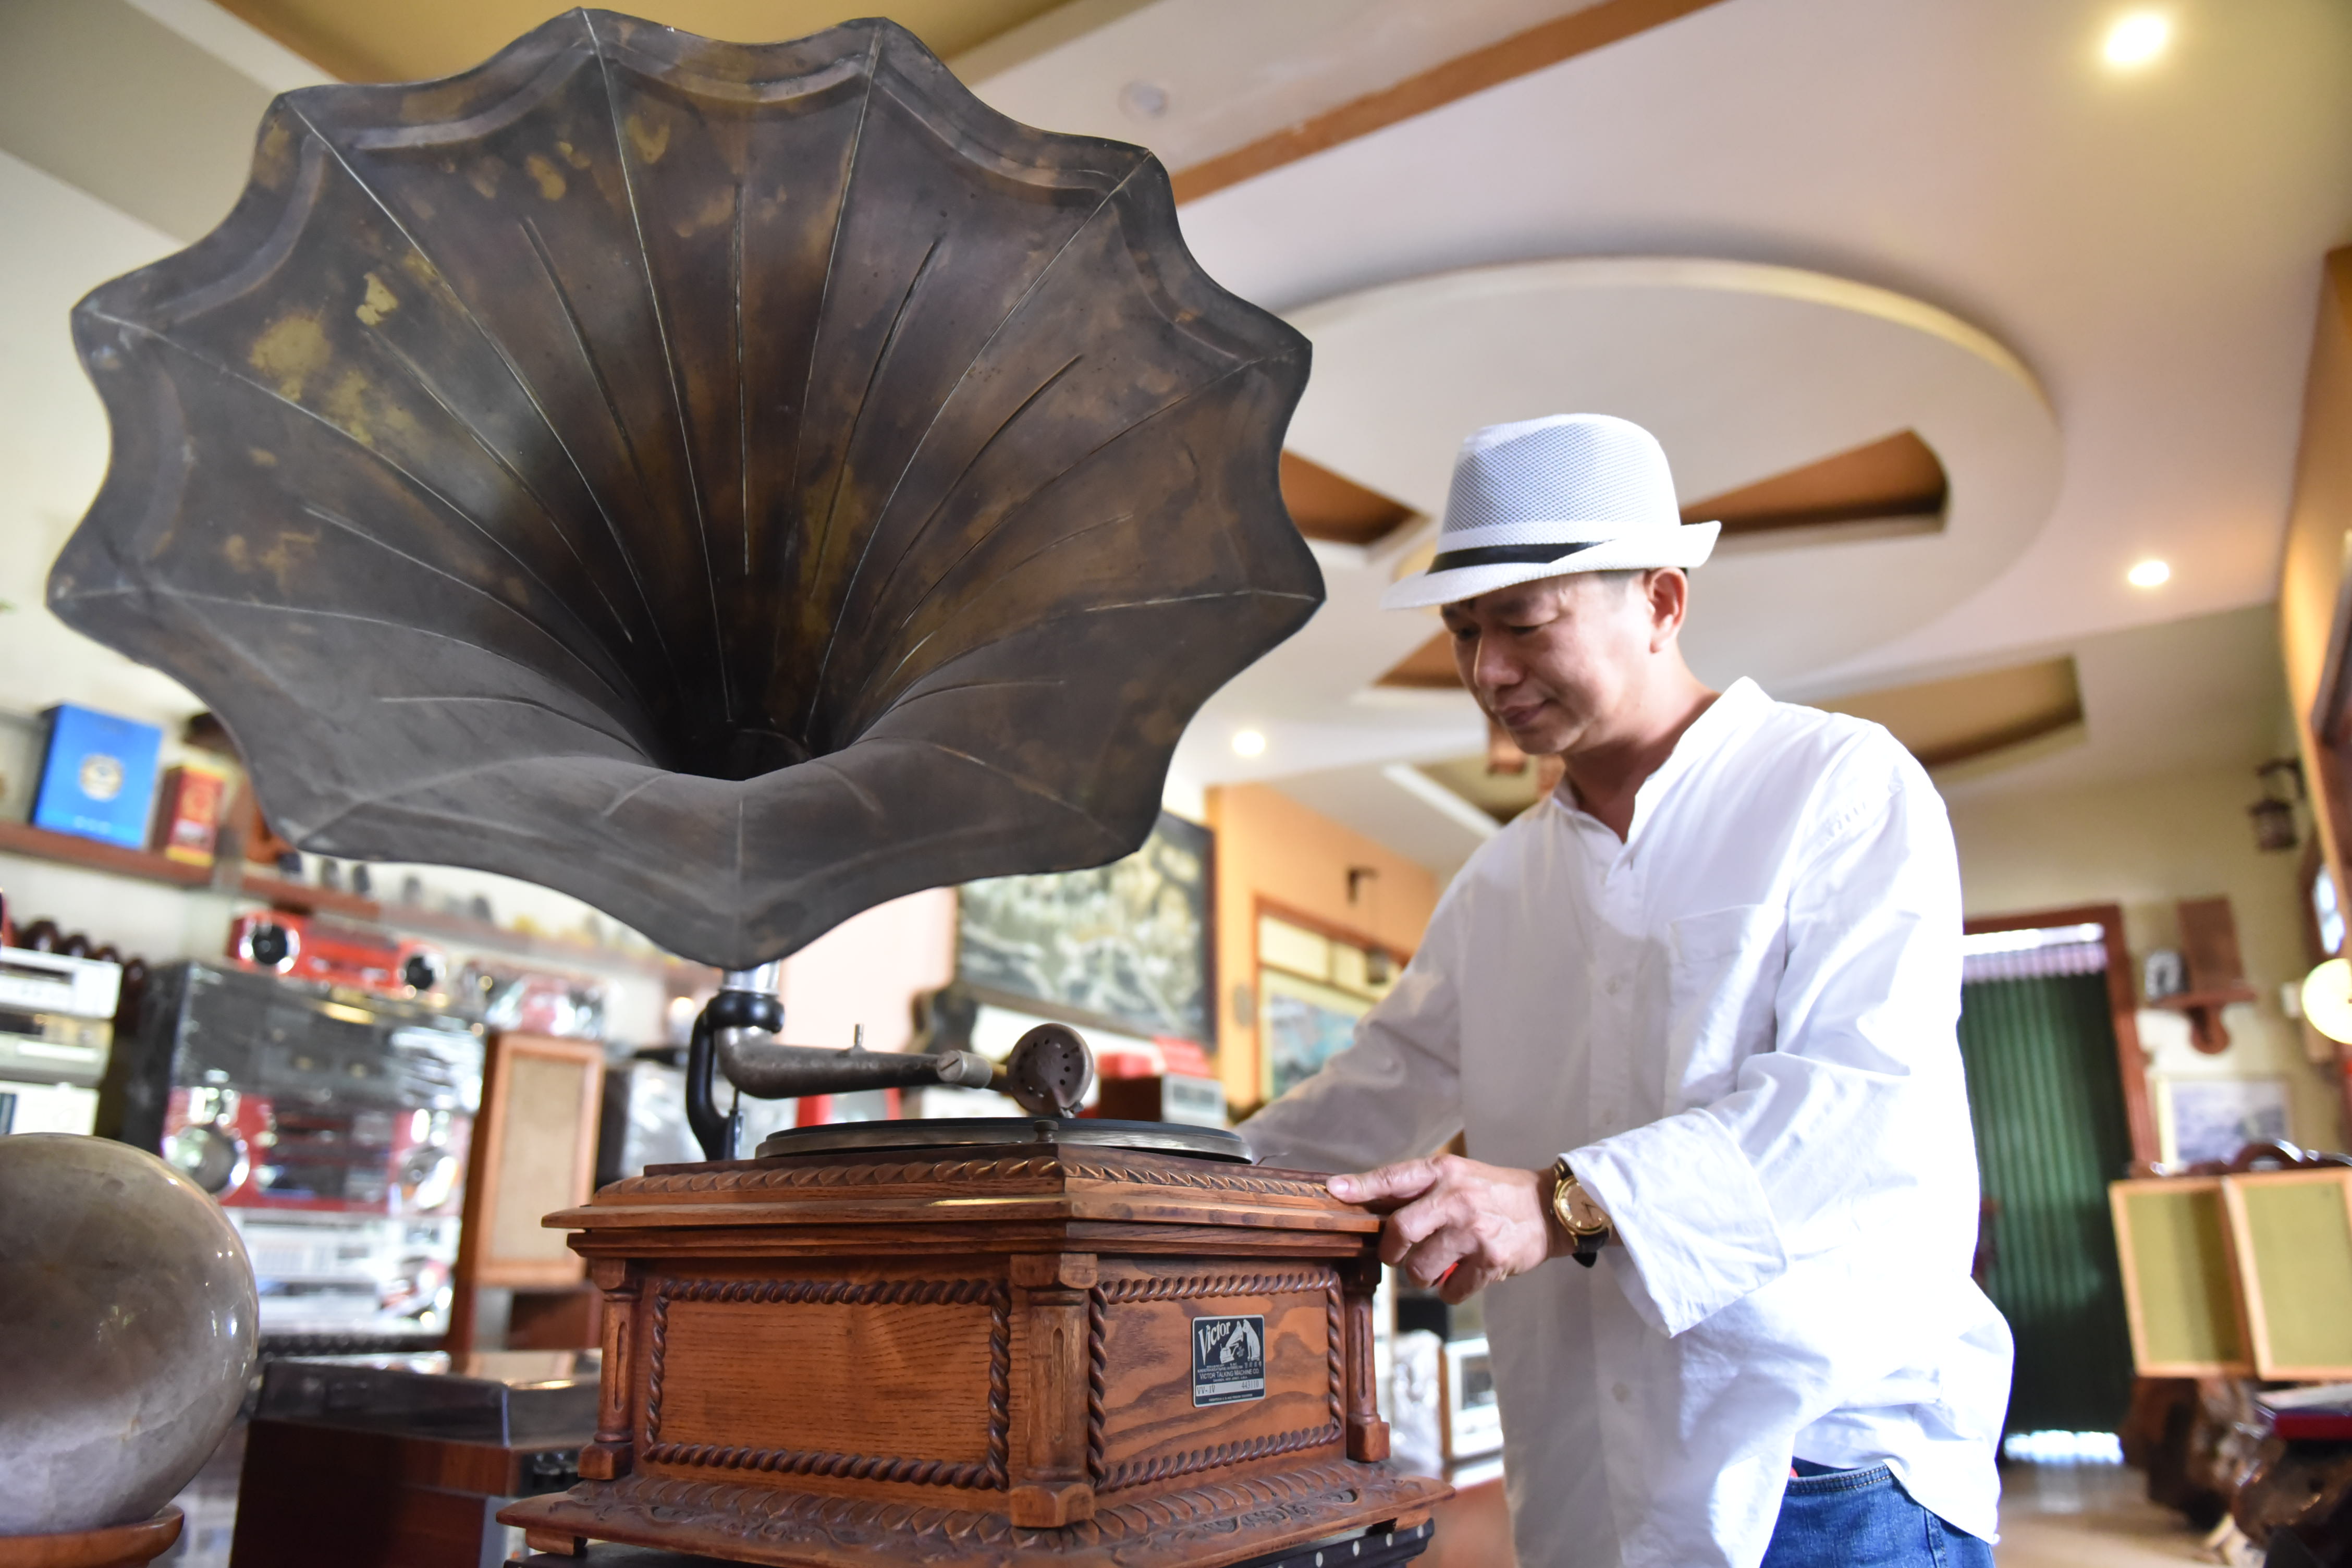 A 1904 Victor gramophone which is still working in Tuan Akai’s collection. Photo: Ngoc Phuong / Tuoi Tre News